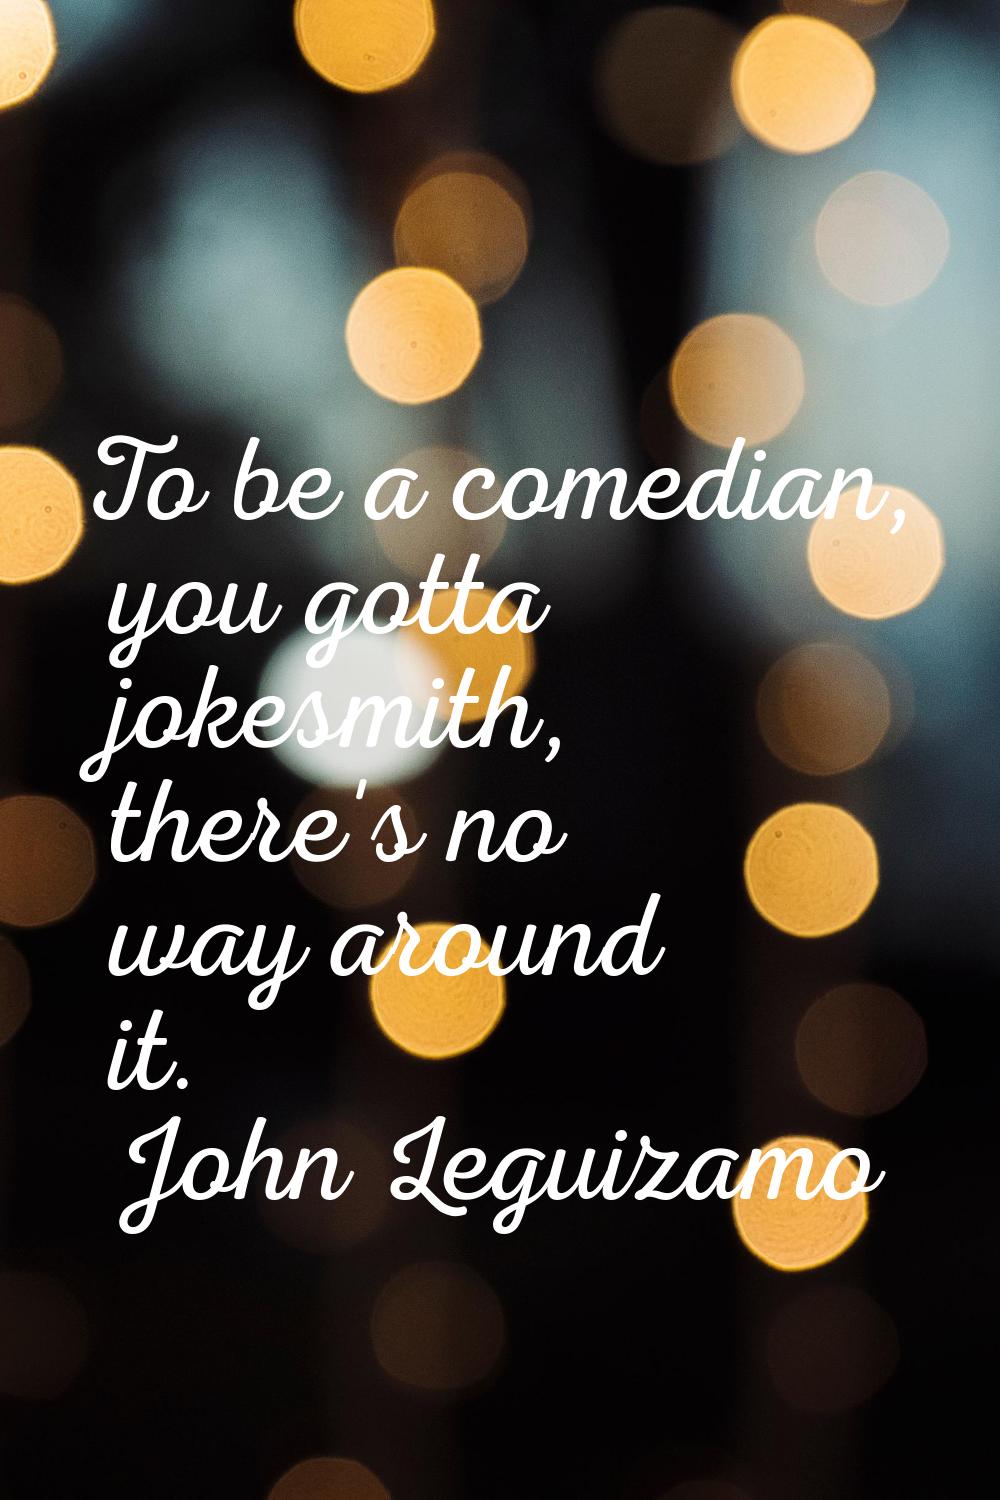 To be a comedian, you gotta jokesmith, there's no way around it.